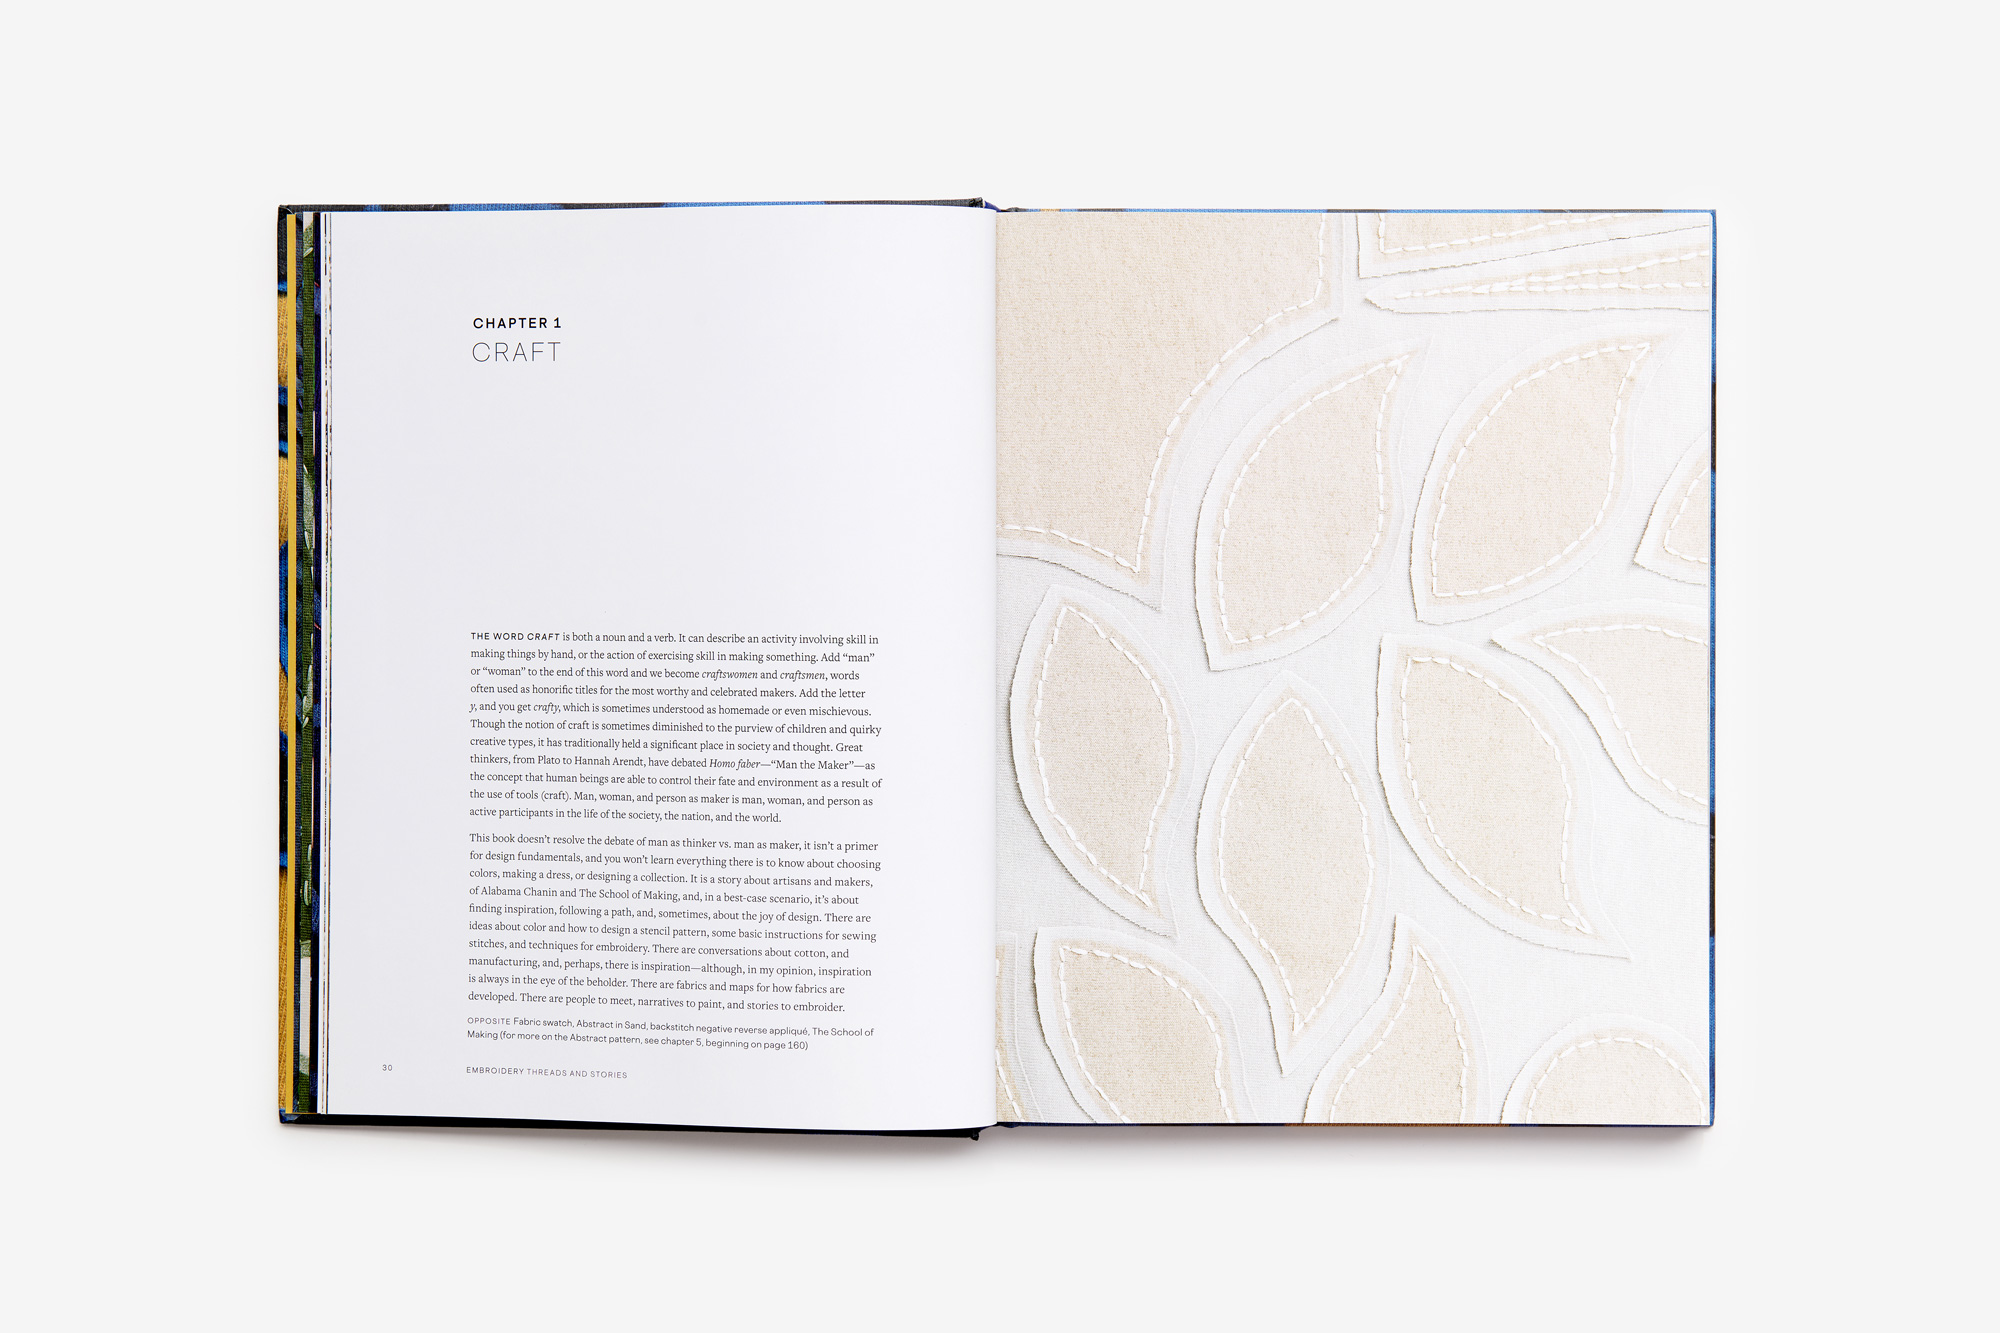 Embroidery: Threads and Stories, a book by Natalie Chanin.